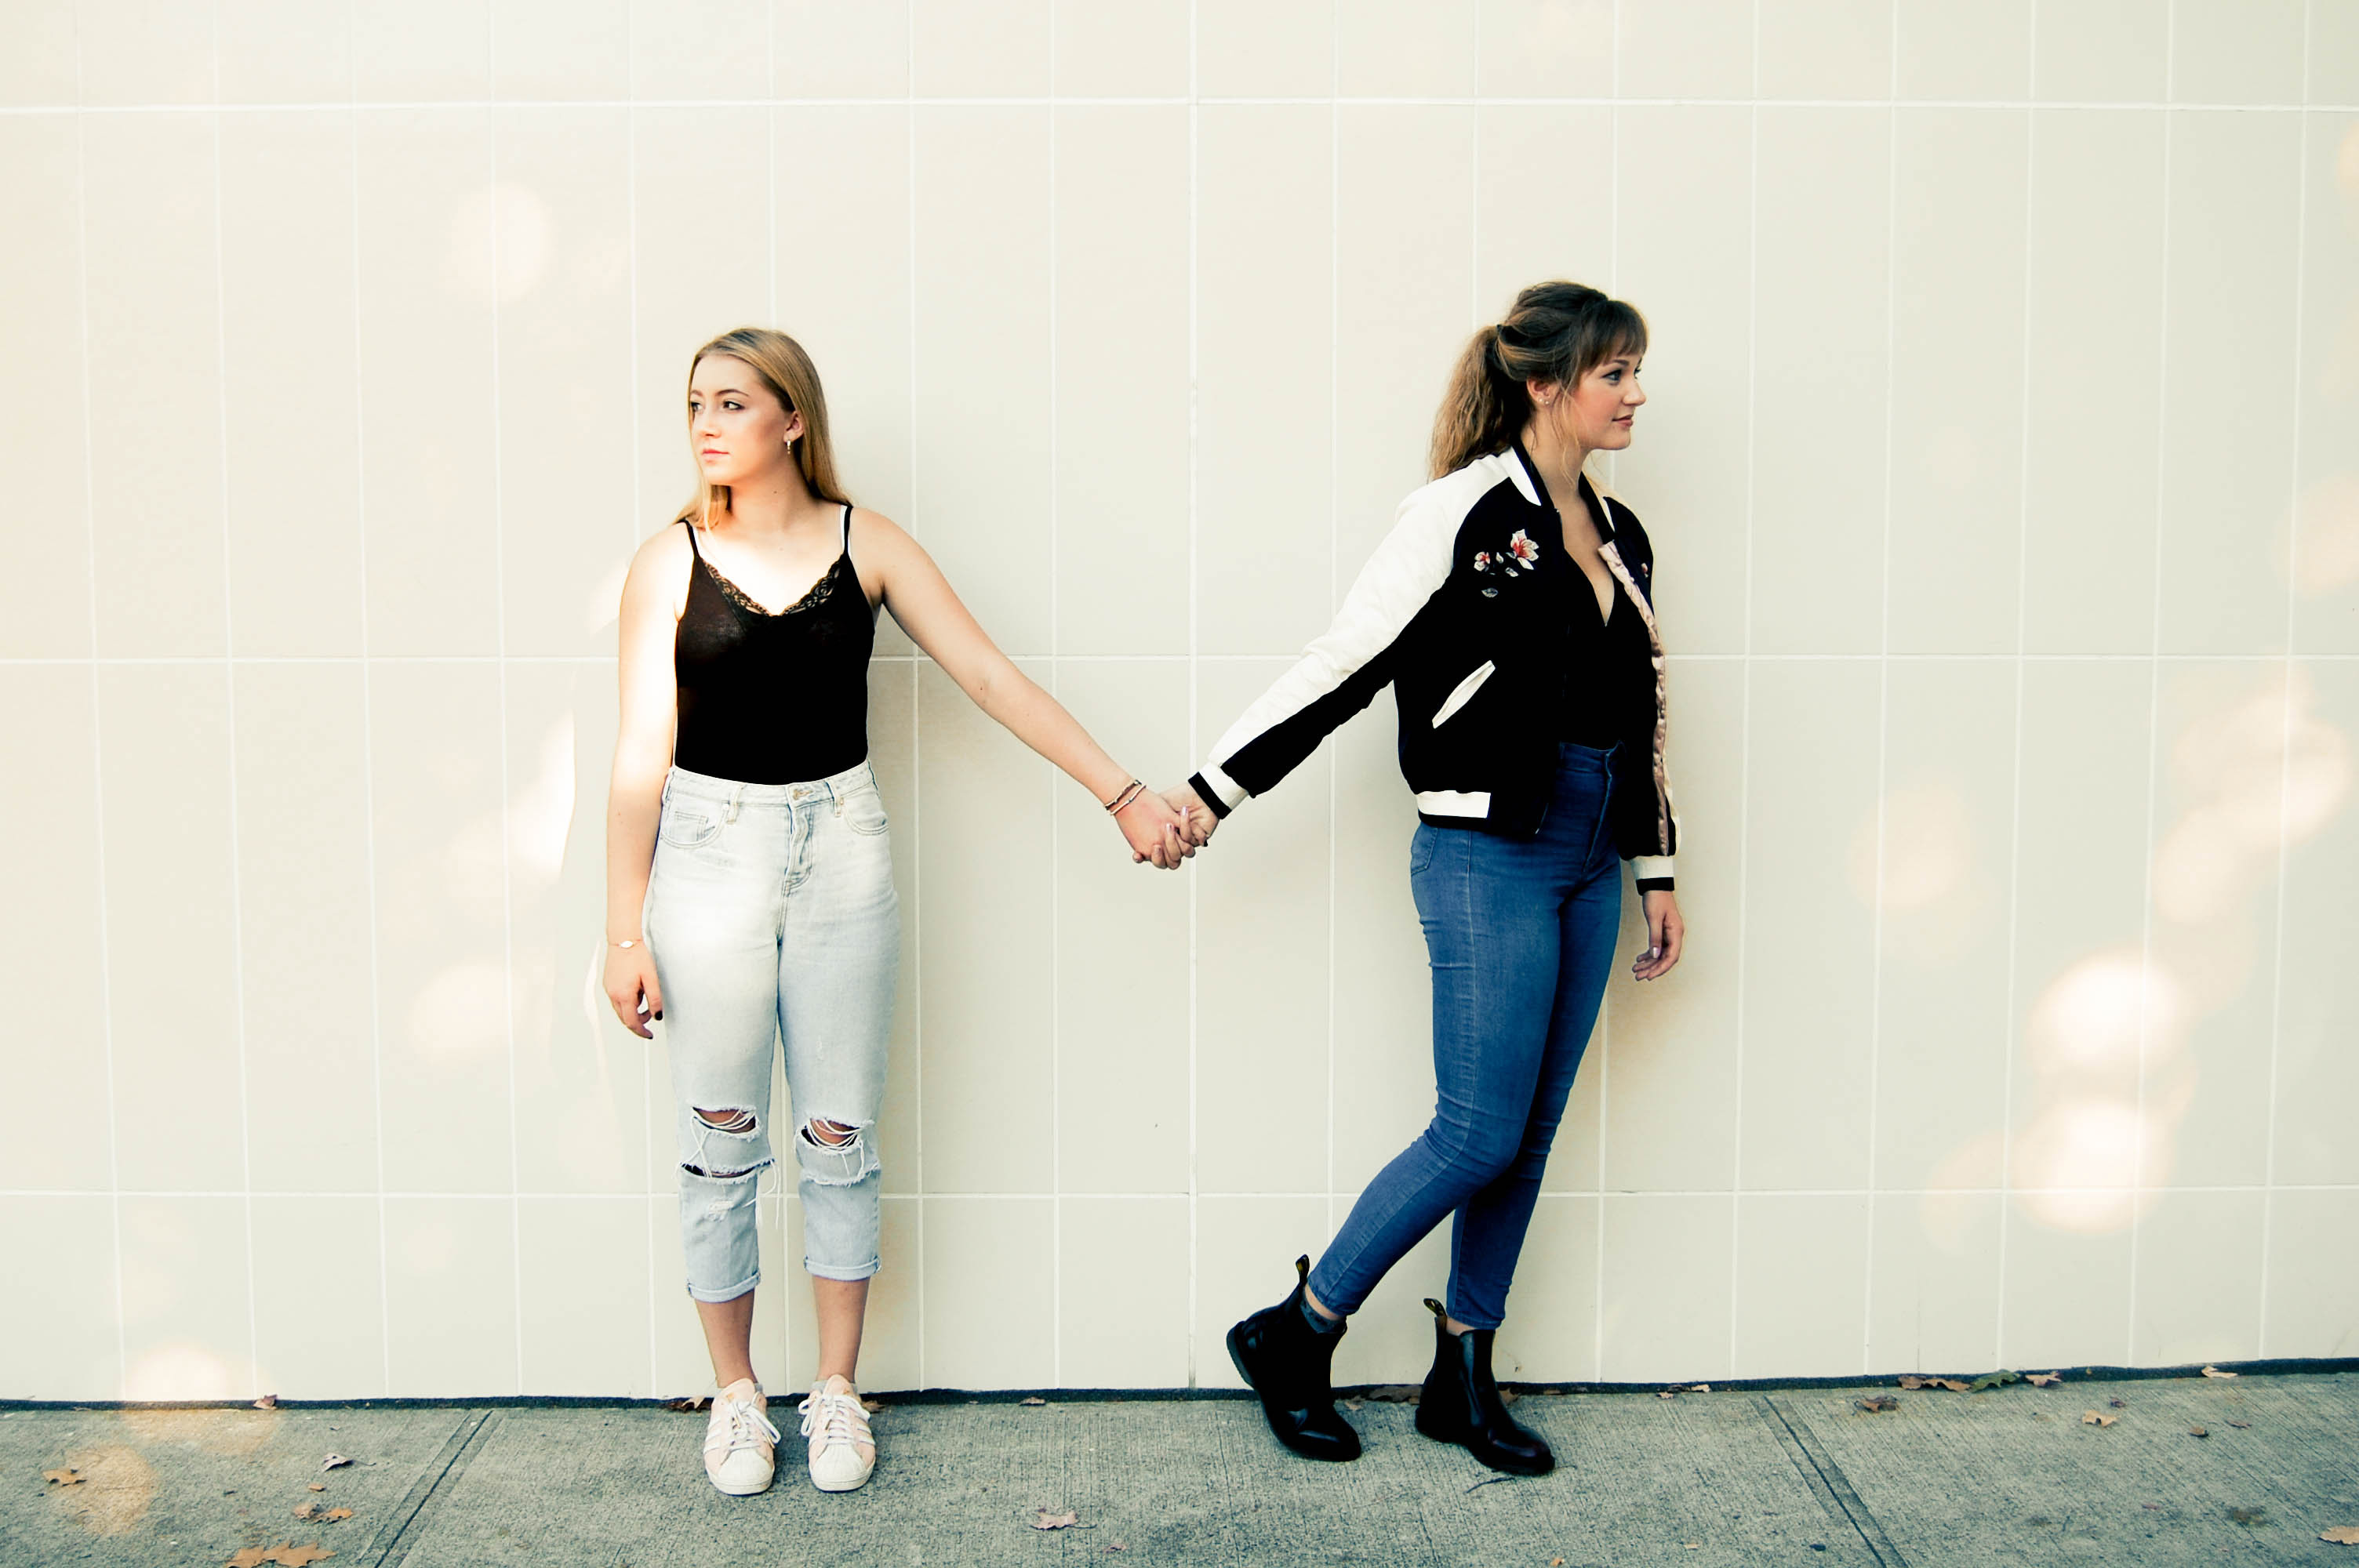 Two Girls holding hands image - Free stock photo - Public Domain ...